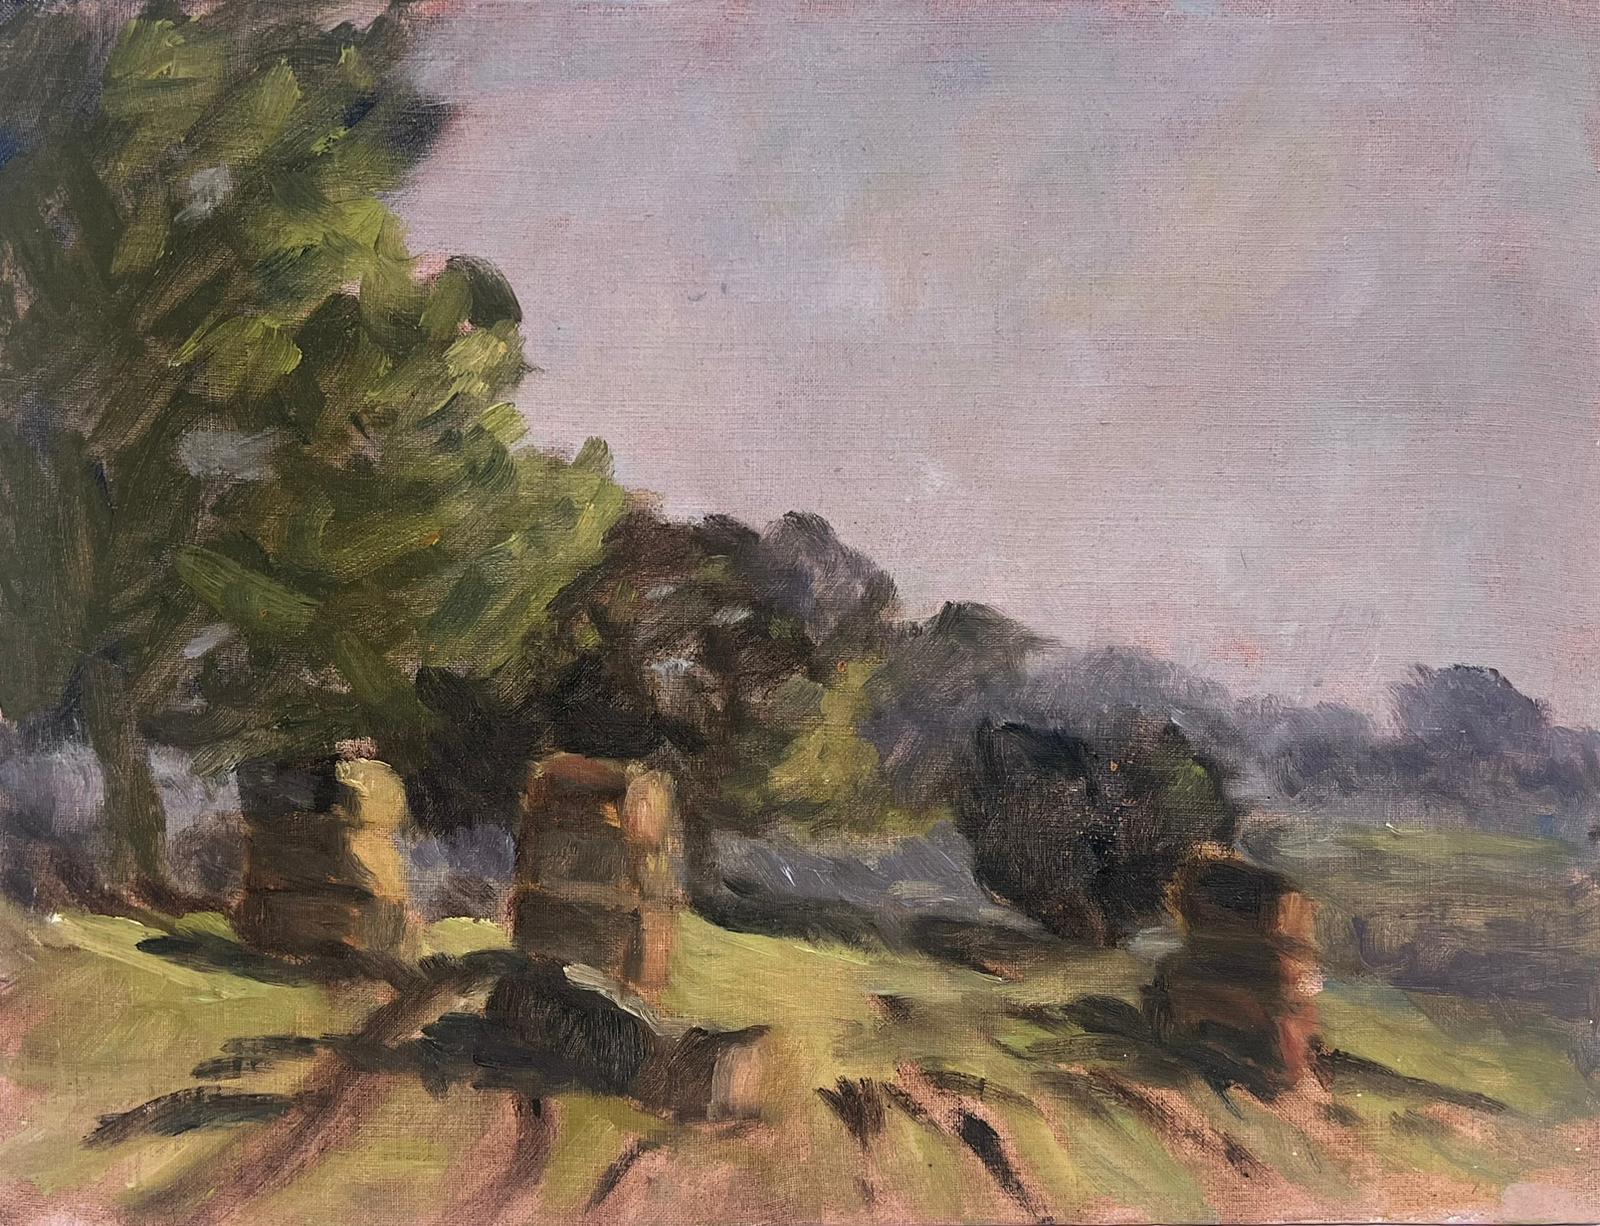 Landscape
British Impressionist School, second half 20th century
oil painting on board , unframed
board: 9 x 12 inches
inscribed verso
condition: overall very good
provenance: private collection, England